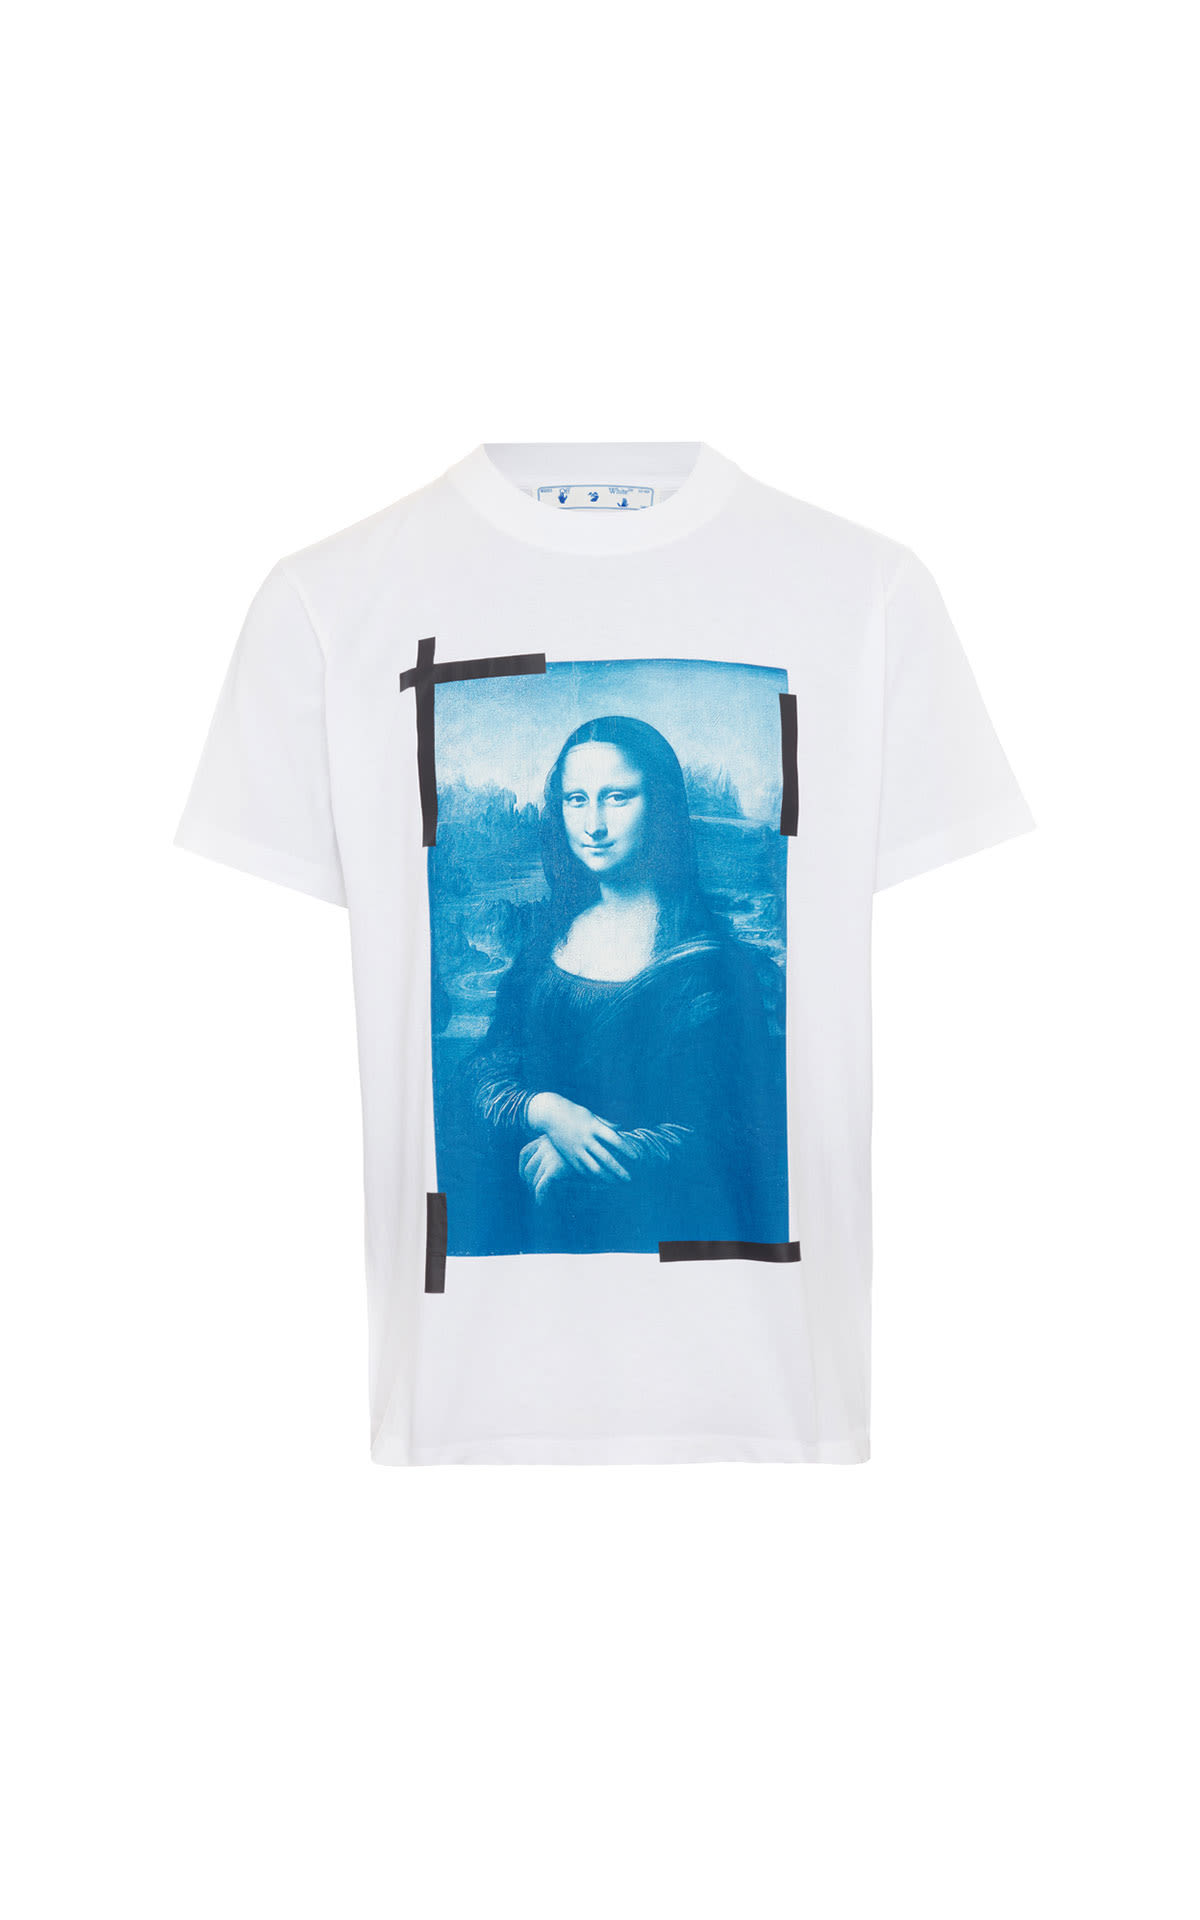 OFF-WHITE Monalisa slim s/s tee white blue from Bicester Village